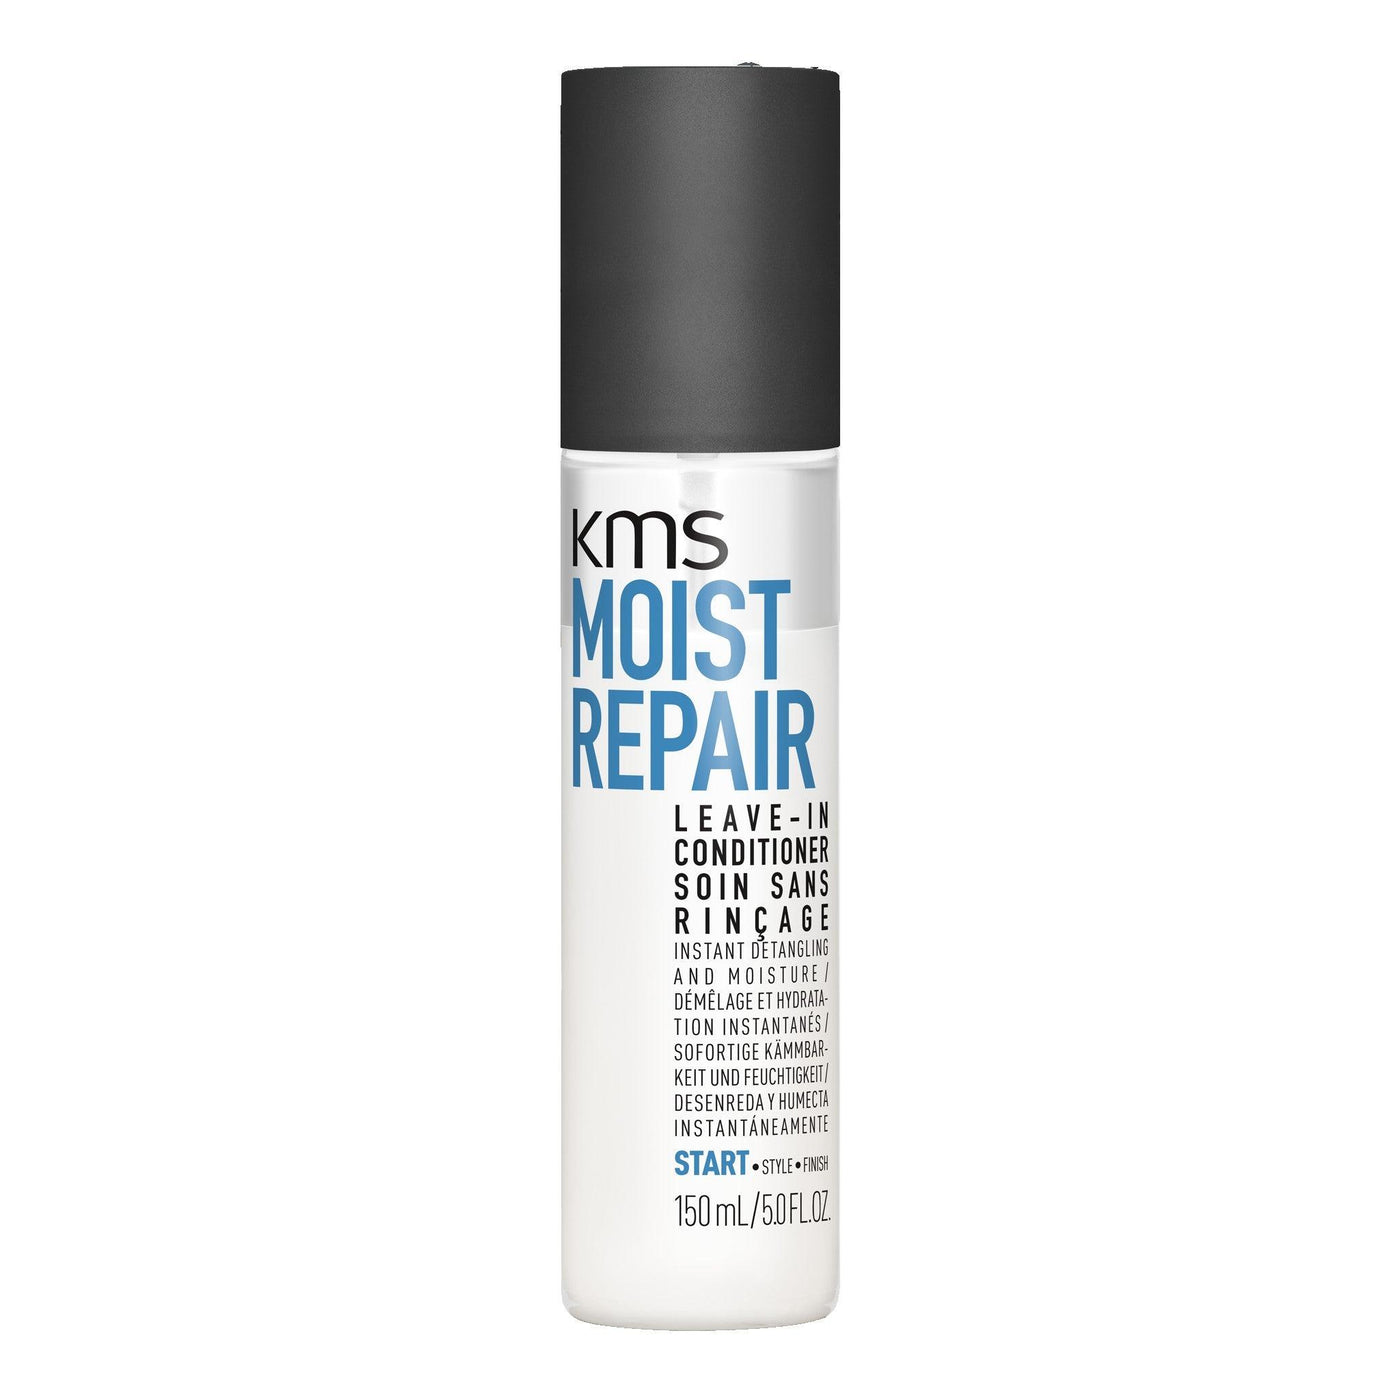 Kms Moistrepair Leave-in Conditioner 150ml KMS Boutique Deauville